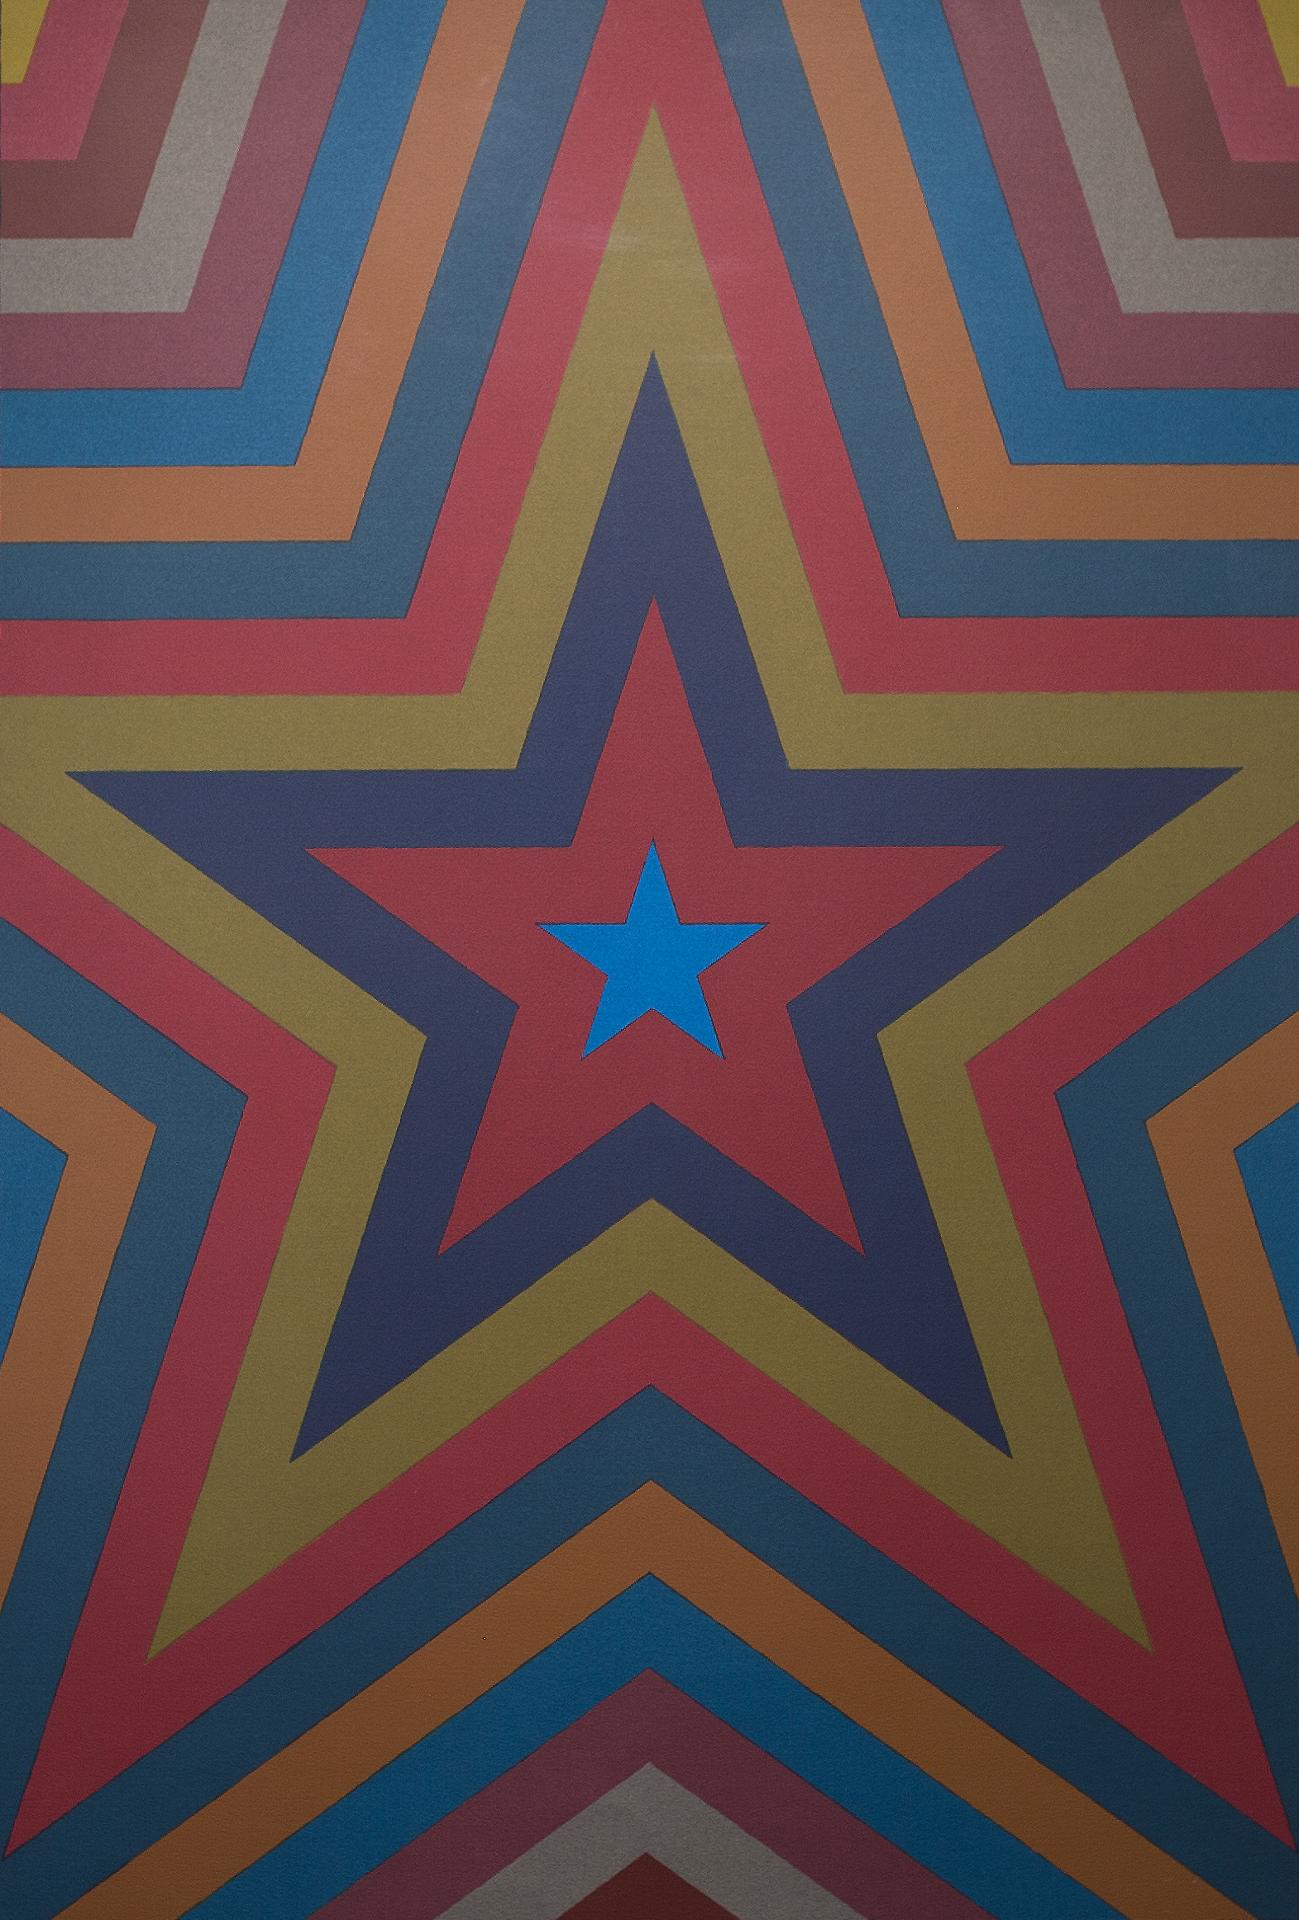 Sol Lewitt (1928-2007) - Five Pointed Star with Color Bands, 1992